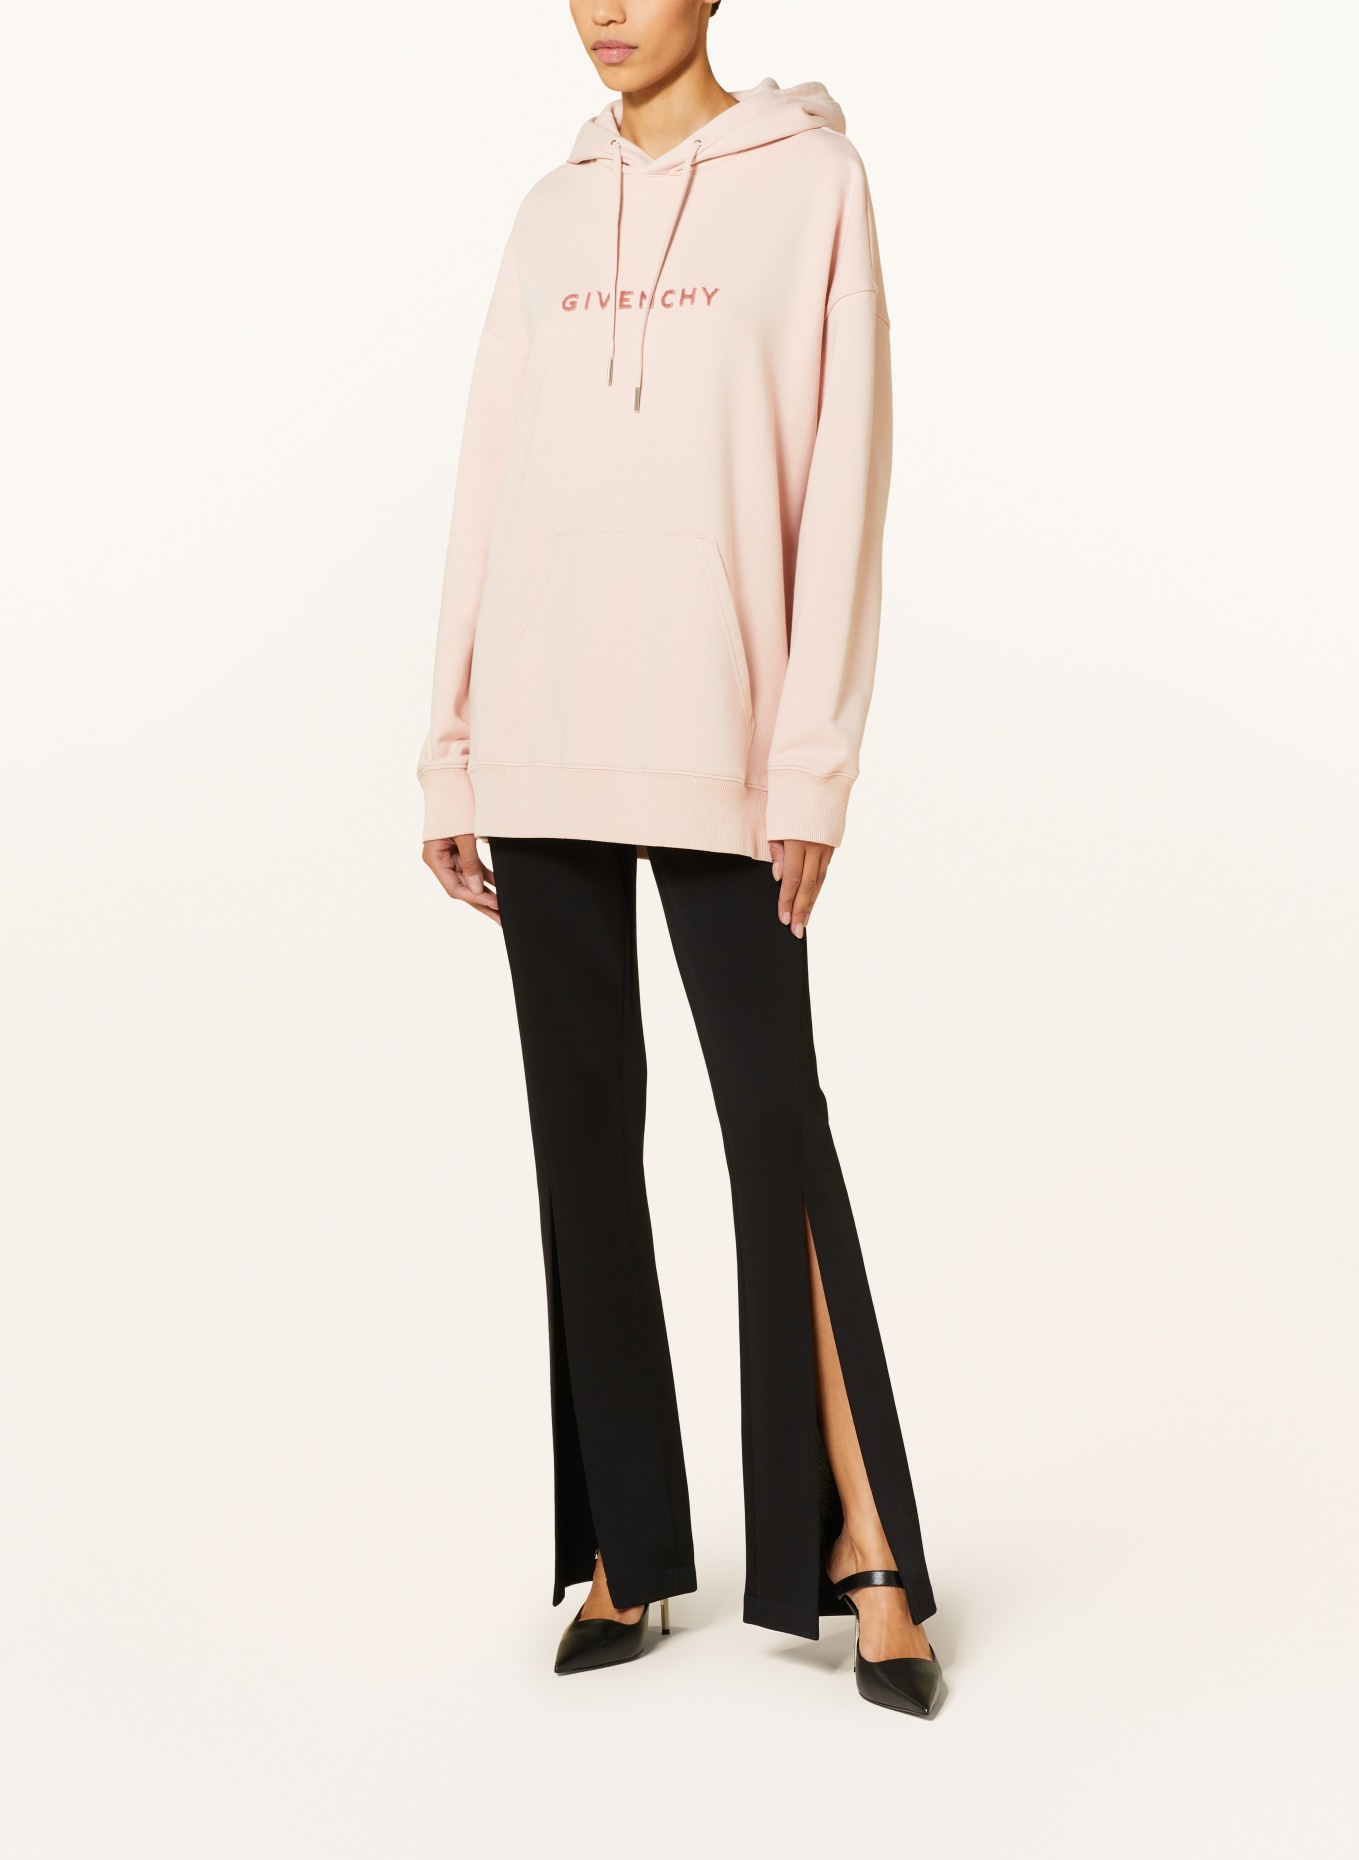 GIVENCHY Oversized hoodie, Color: LIGHT PINK (Image 2)